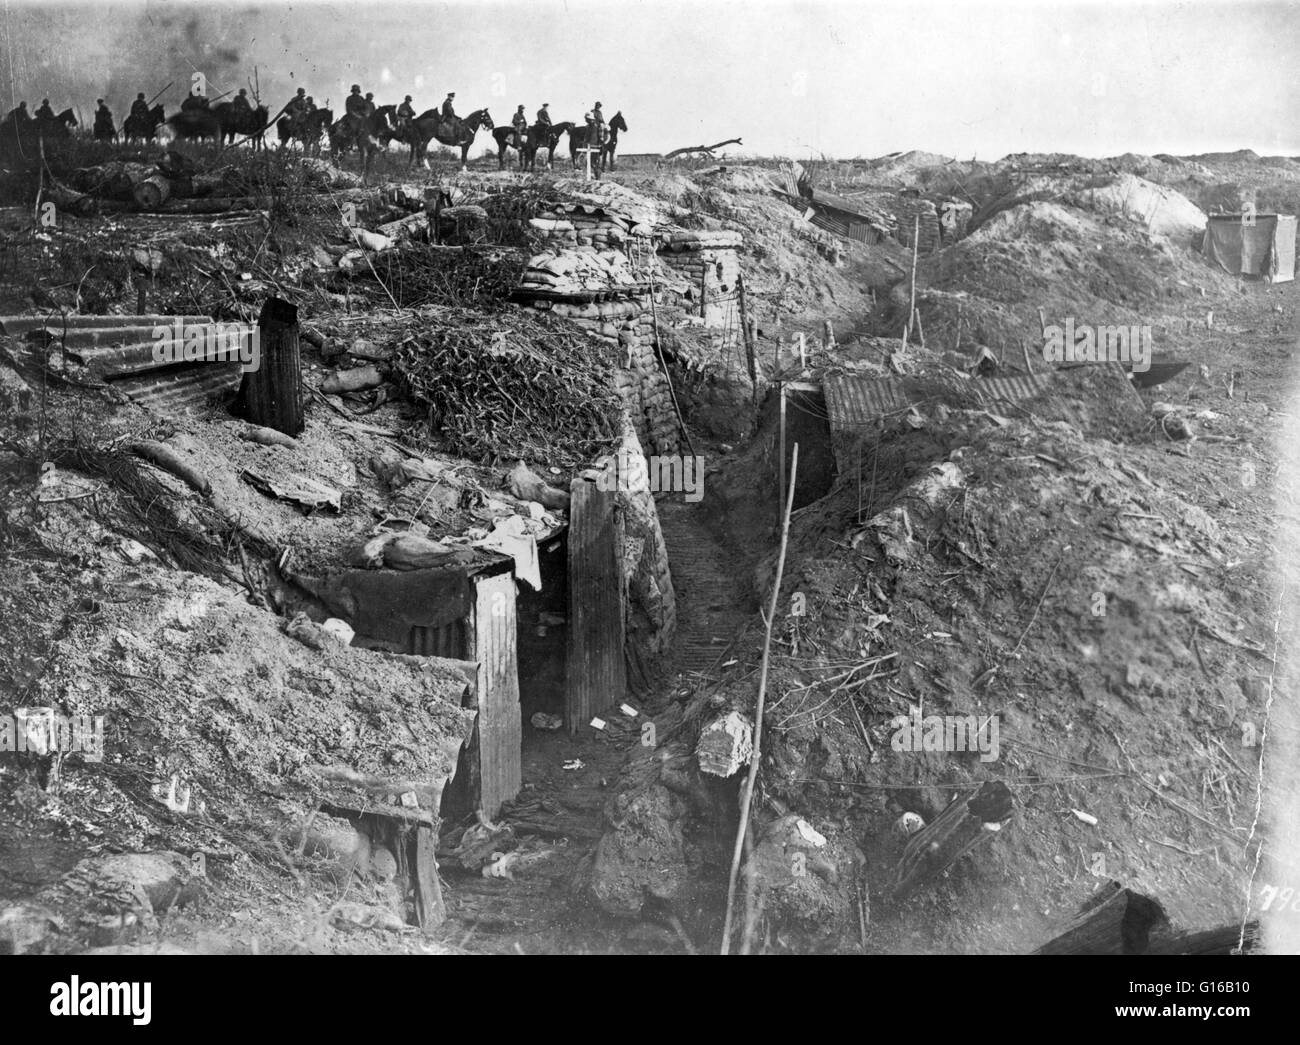 Abandoned British trench which was captured by the Germans; in background, German soldiers on horseback view the scene, circa 1914-18. No location given on caption card. Trench warfare is a form of land warfare using occupied fighting lines consisting lar Stock Photo